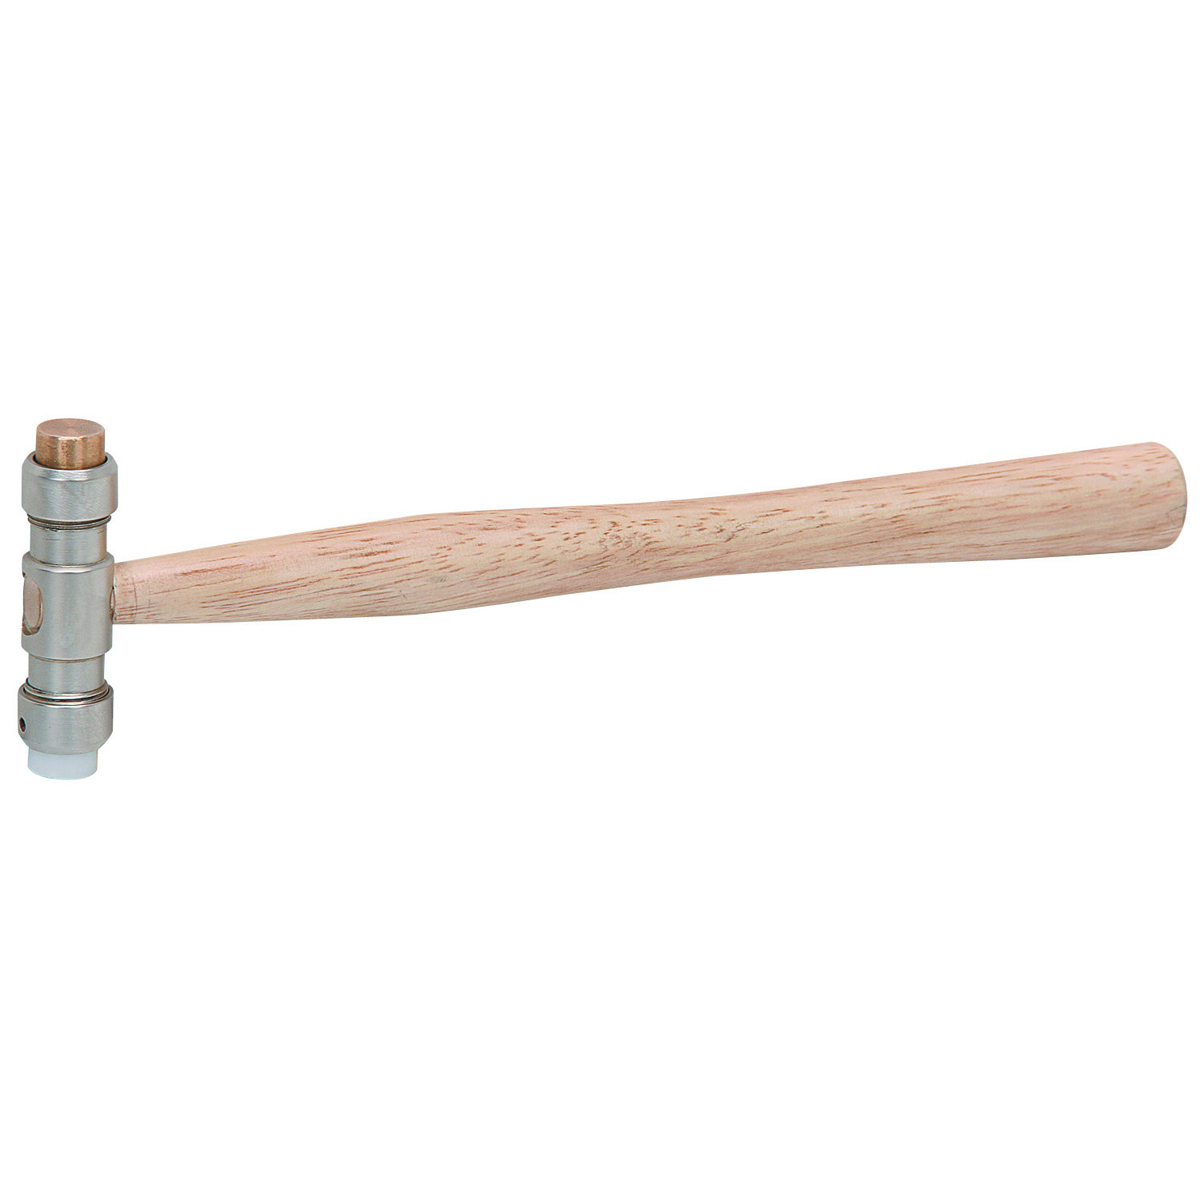 PITTSBURGH 3 Oz Double Sided Mallet - Item 98285